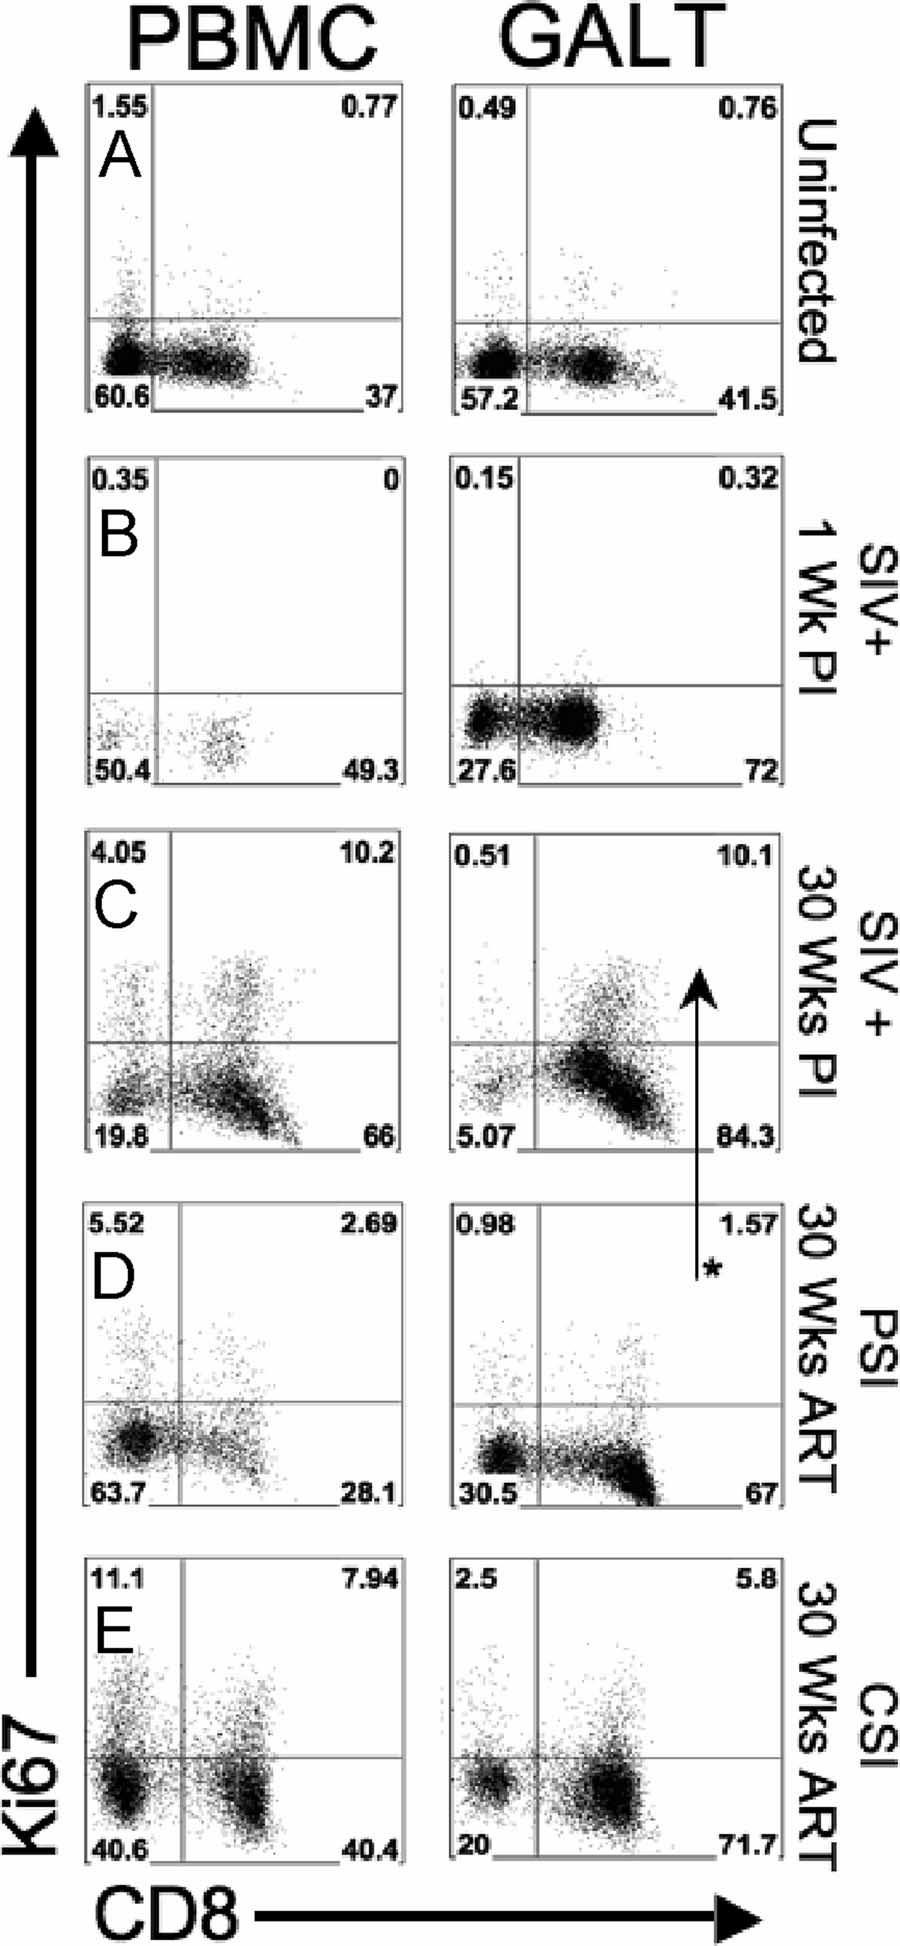 VOL. 82, 2008 GUT MUCOSAL CD4 T CELLS AND THEIR RESTORATION IN ART 4023 Downloaded from http://jvi.asm.org/ FIG. 6.